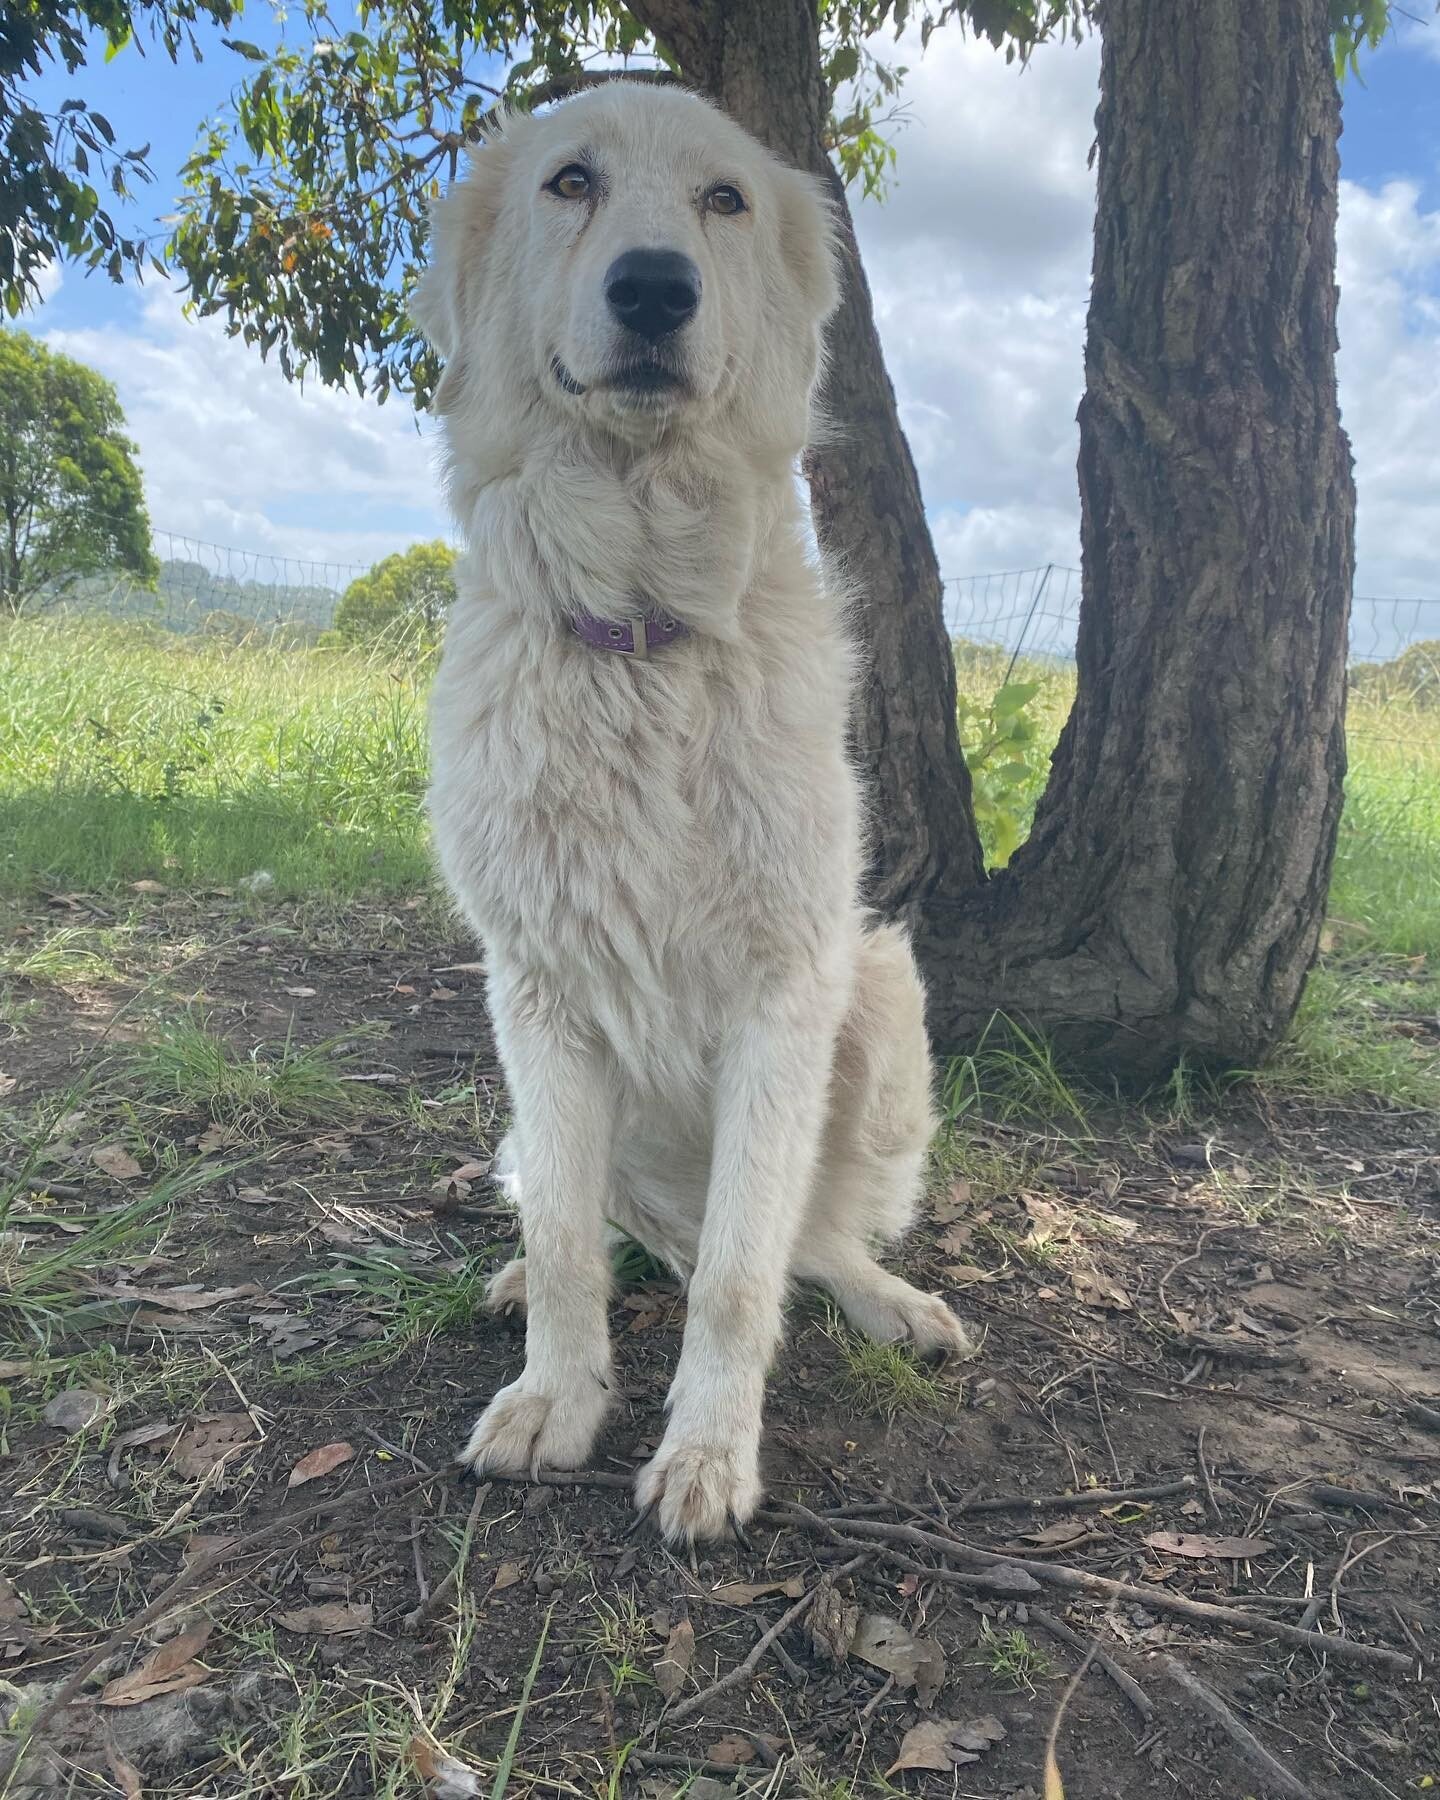 Meet the Maremma&rsquo;s; Torvi and our new (rehomed ex city Maremma) Willow. Torvi is an experienced livestock guardian and has been helping Willow settle into her new job. Willow has been introduced to chickens and will be meeting the bigger flock 